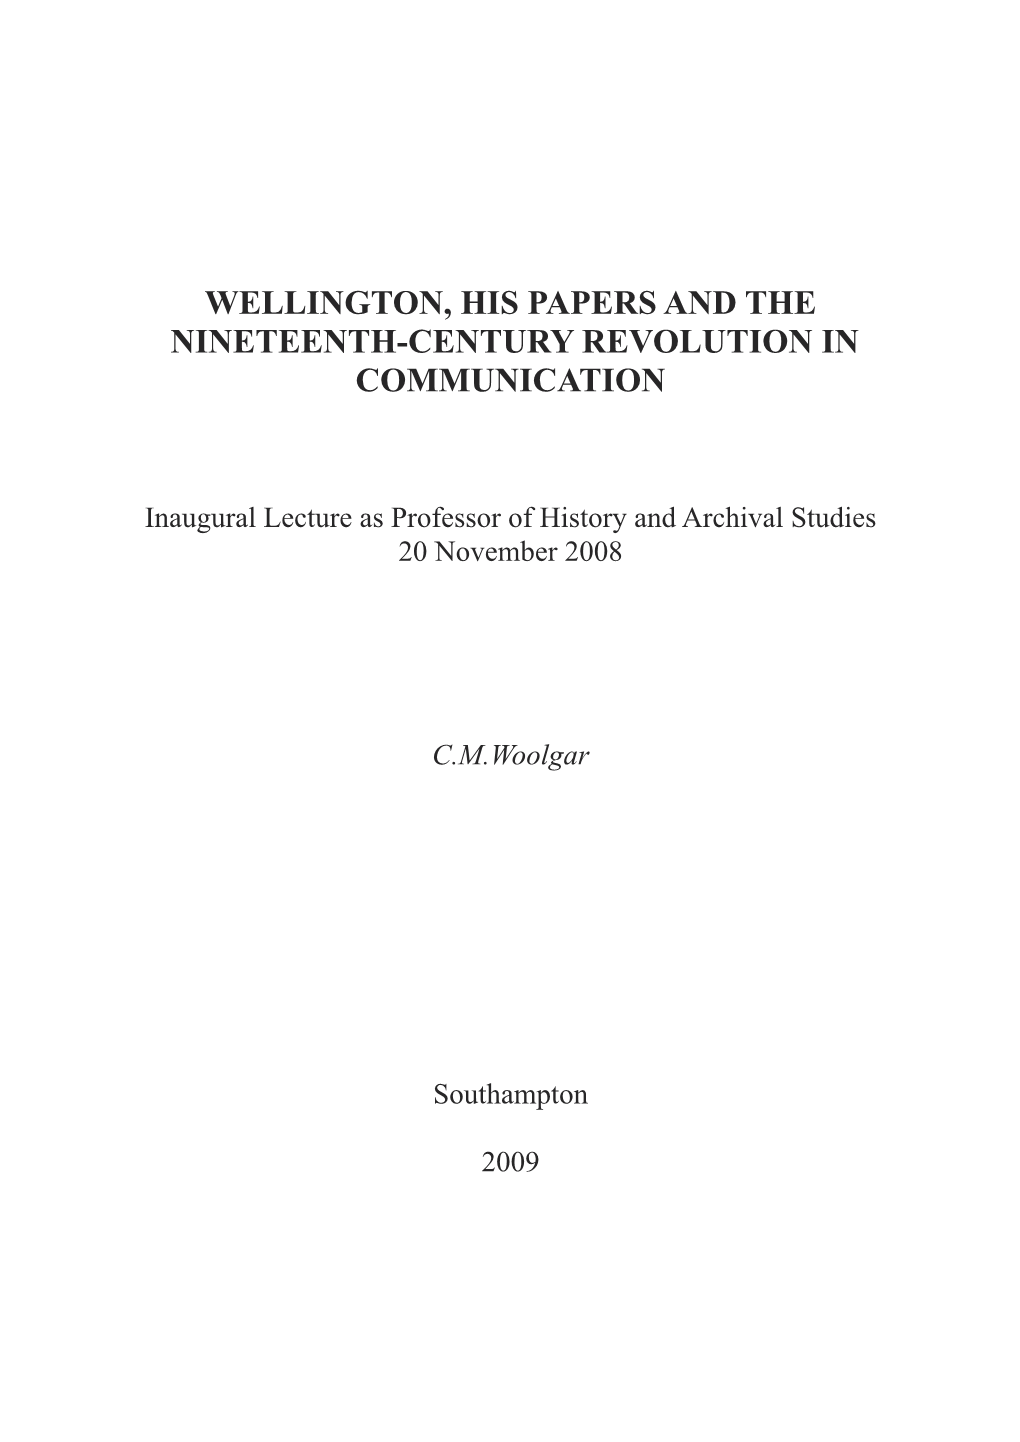 Wellington, His Papers and the Nineteenth-Century Revolution in Communication